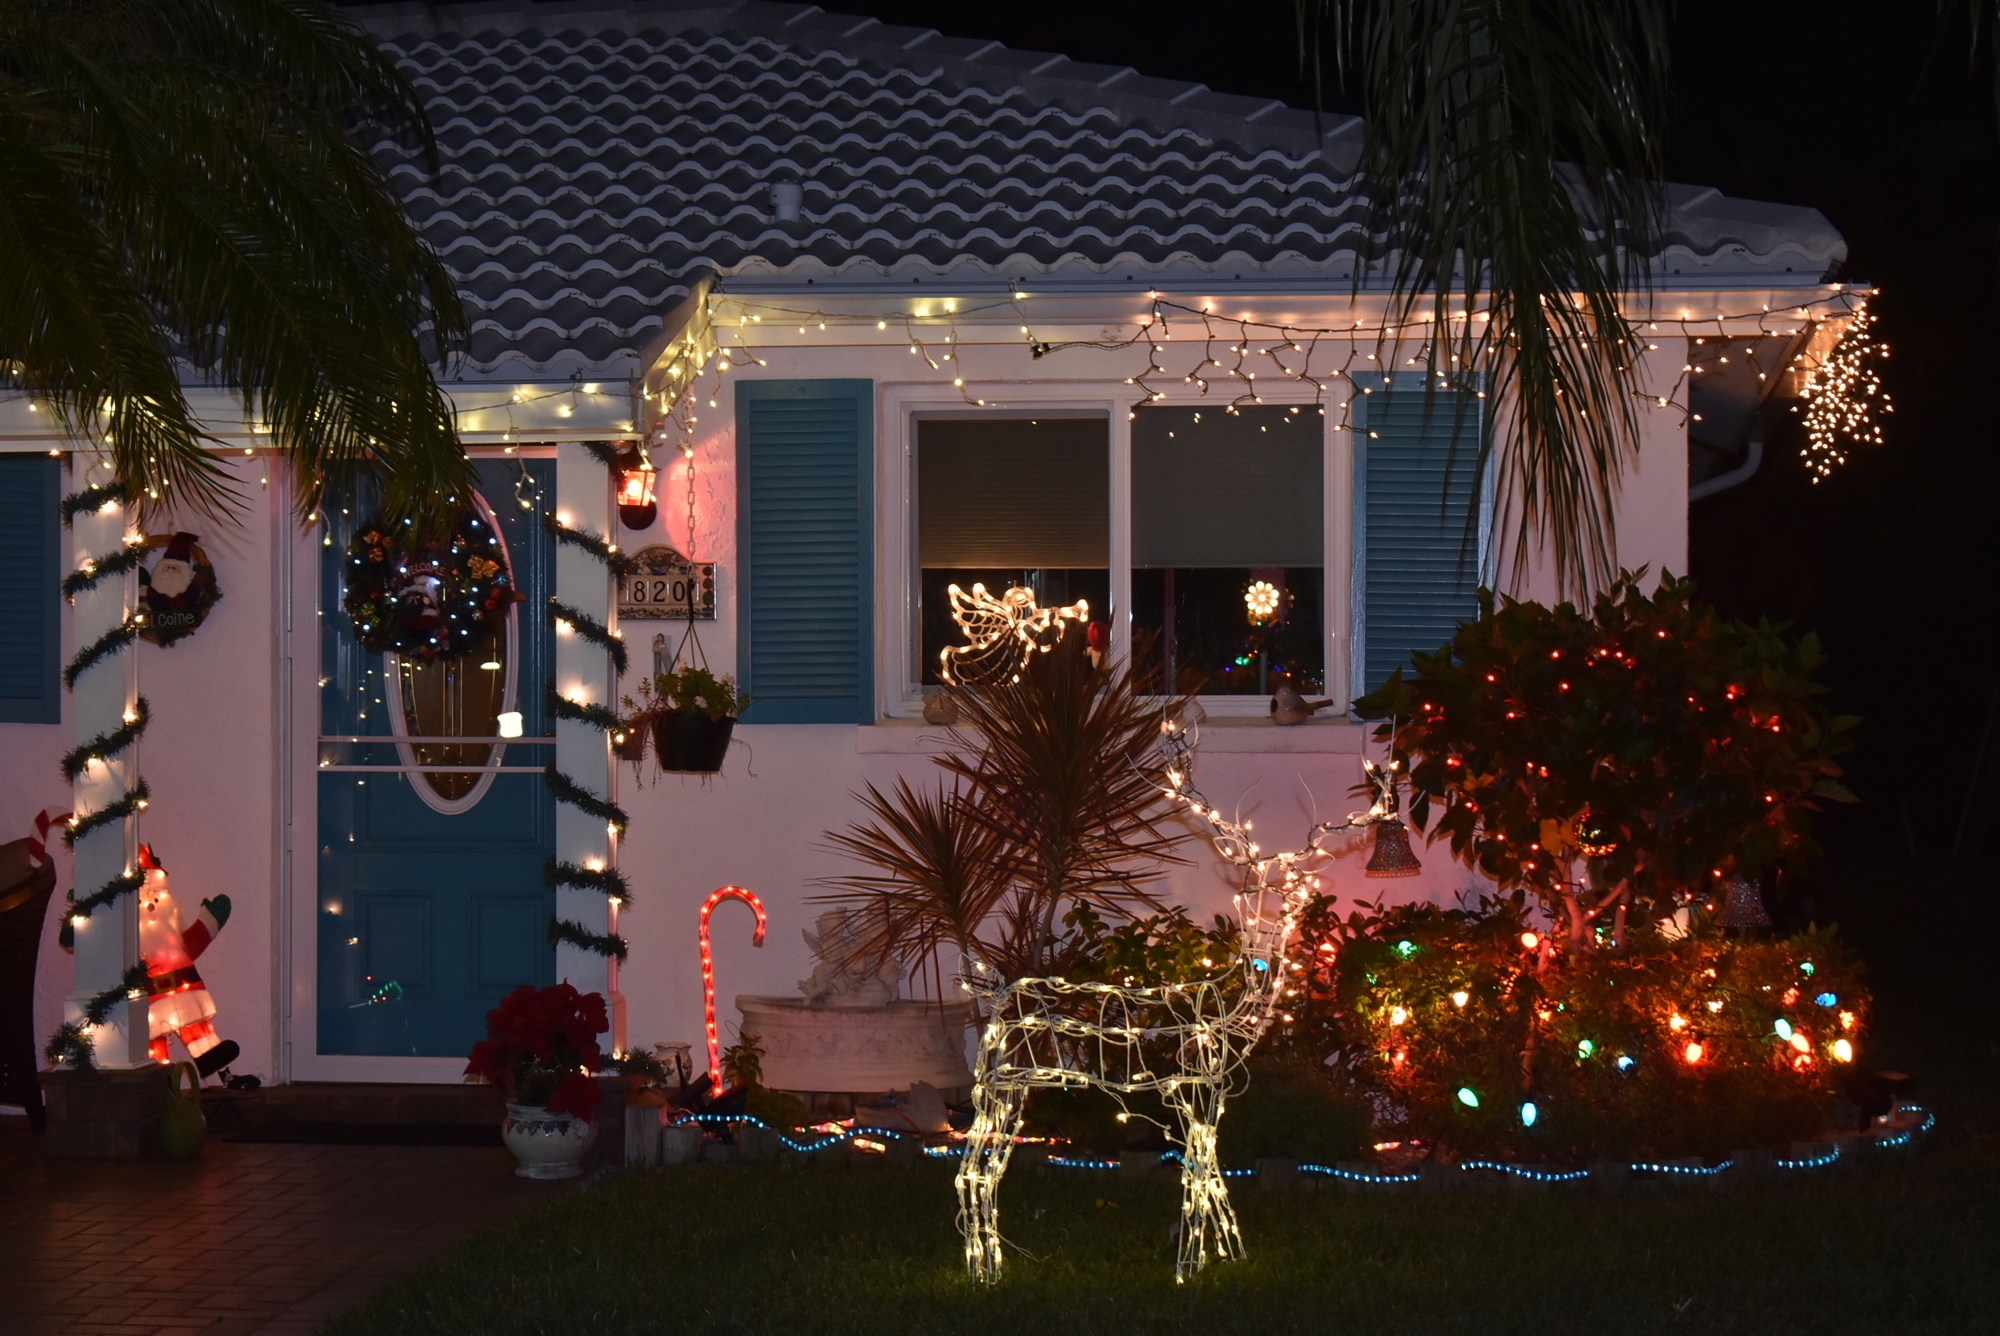 Along the main road in Spanish Main Yacht Club, this house twinkles merry and bright.